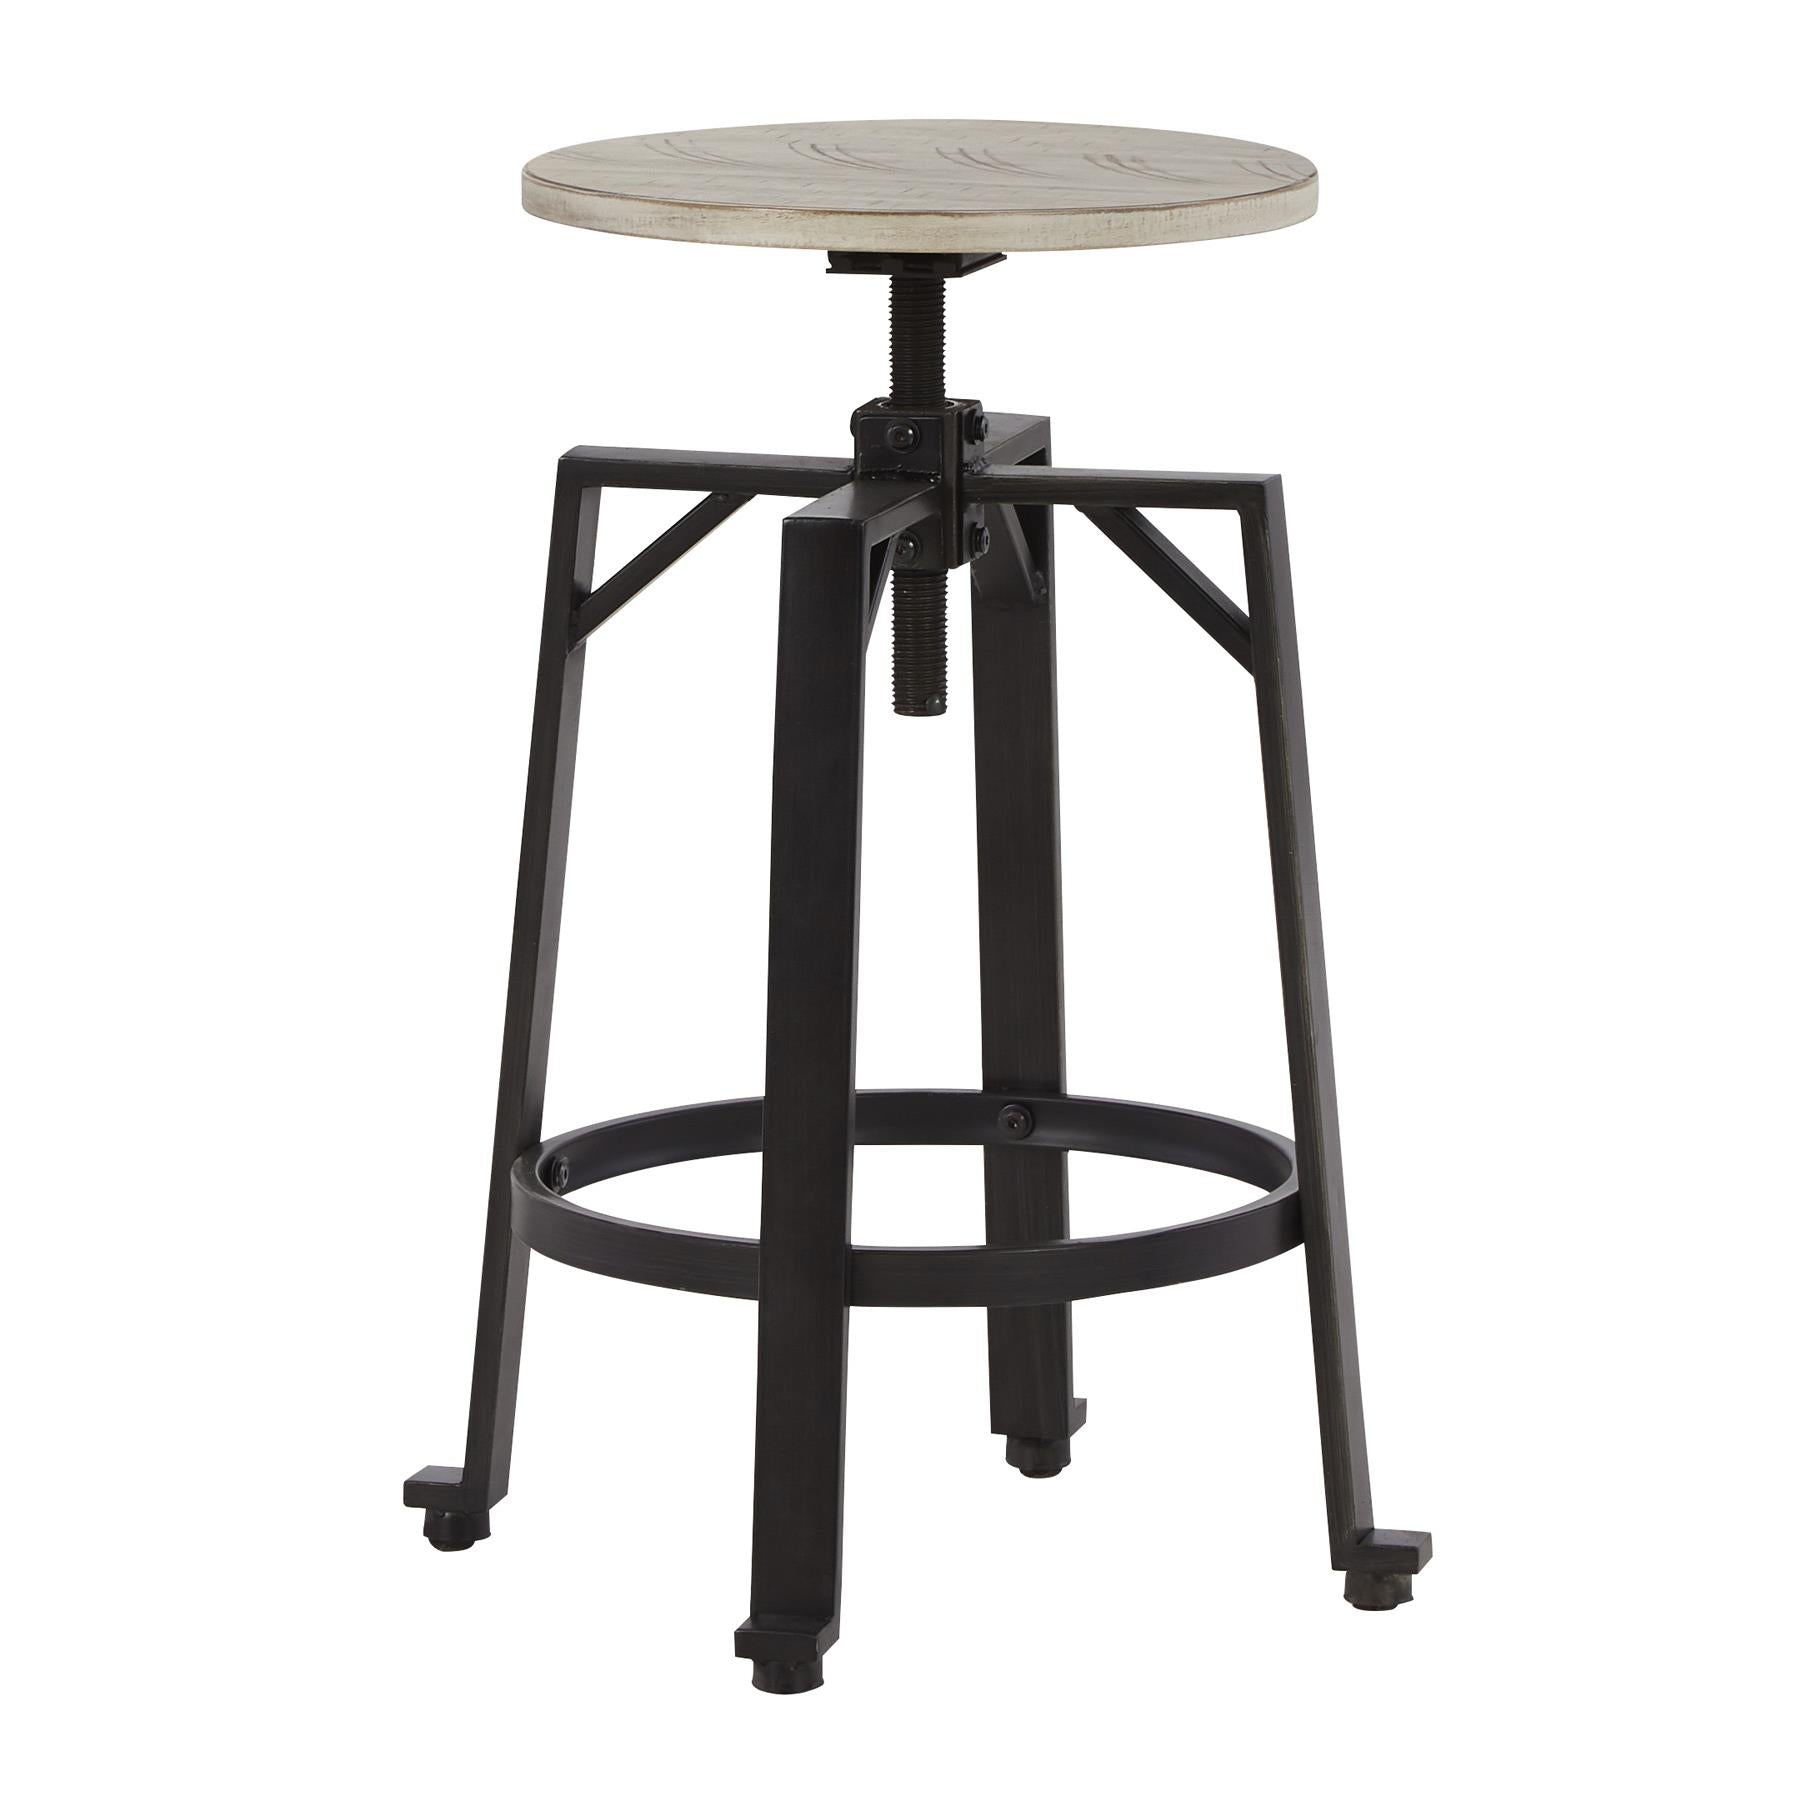 Signature Design by Ashley Karisslyn Adjustable Height Stool D336-024 IMAGE 1